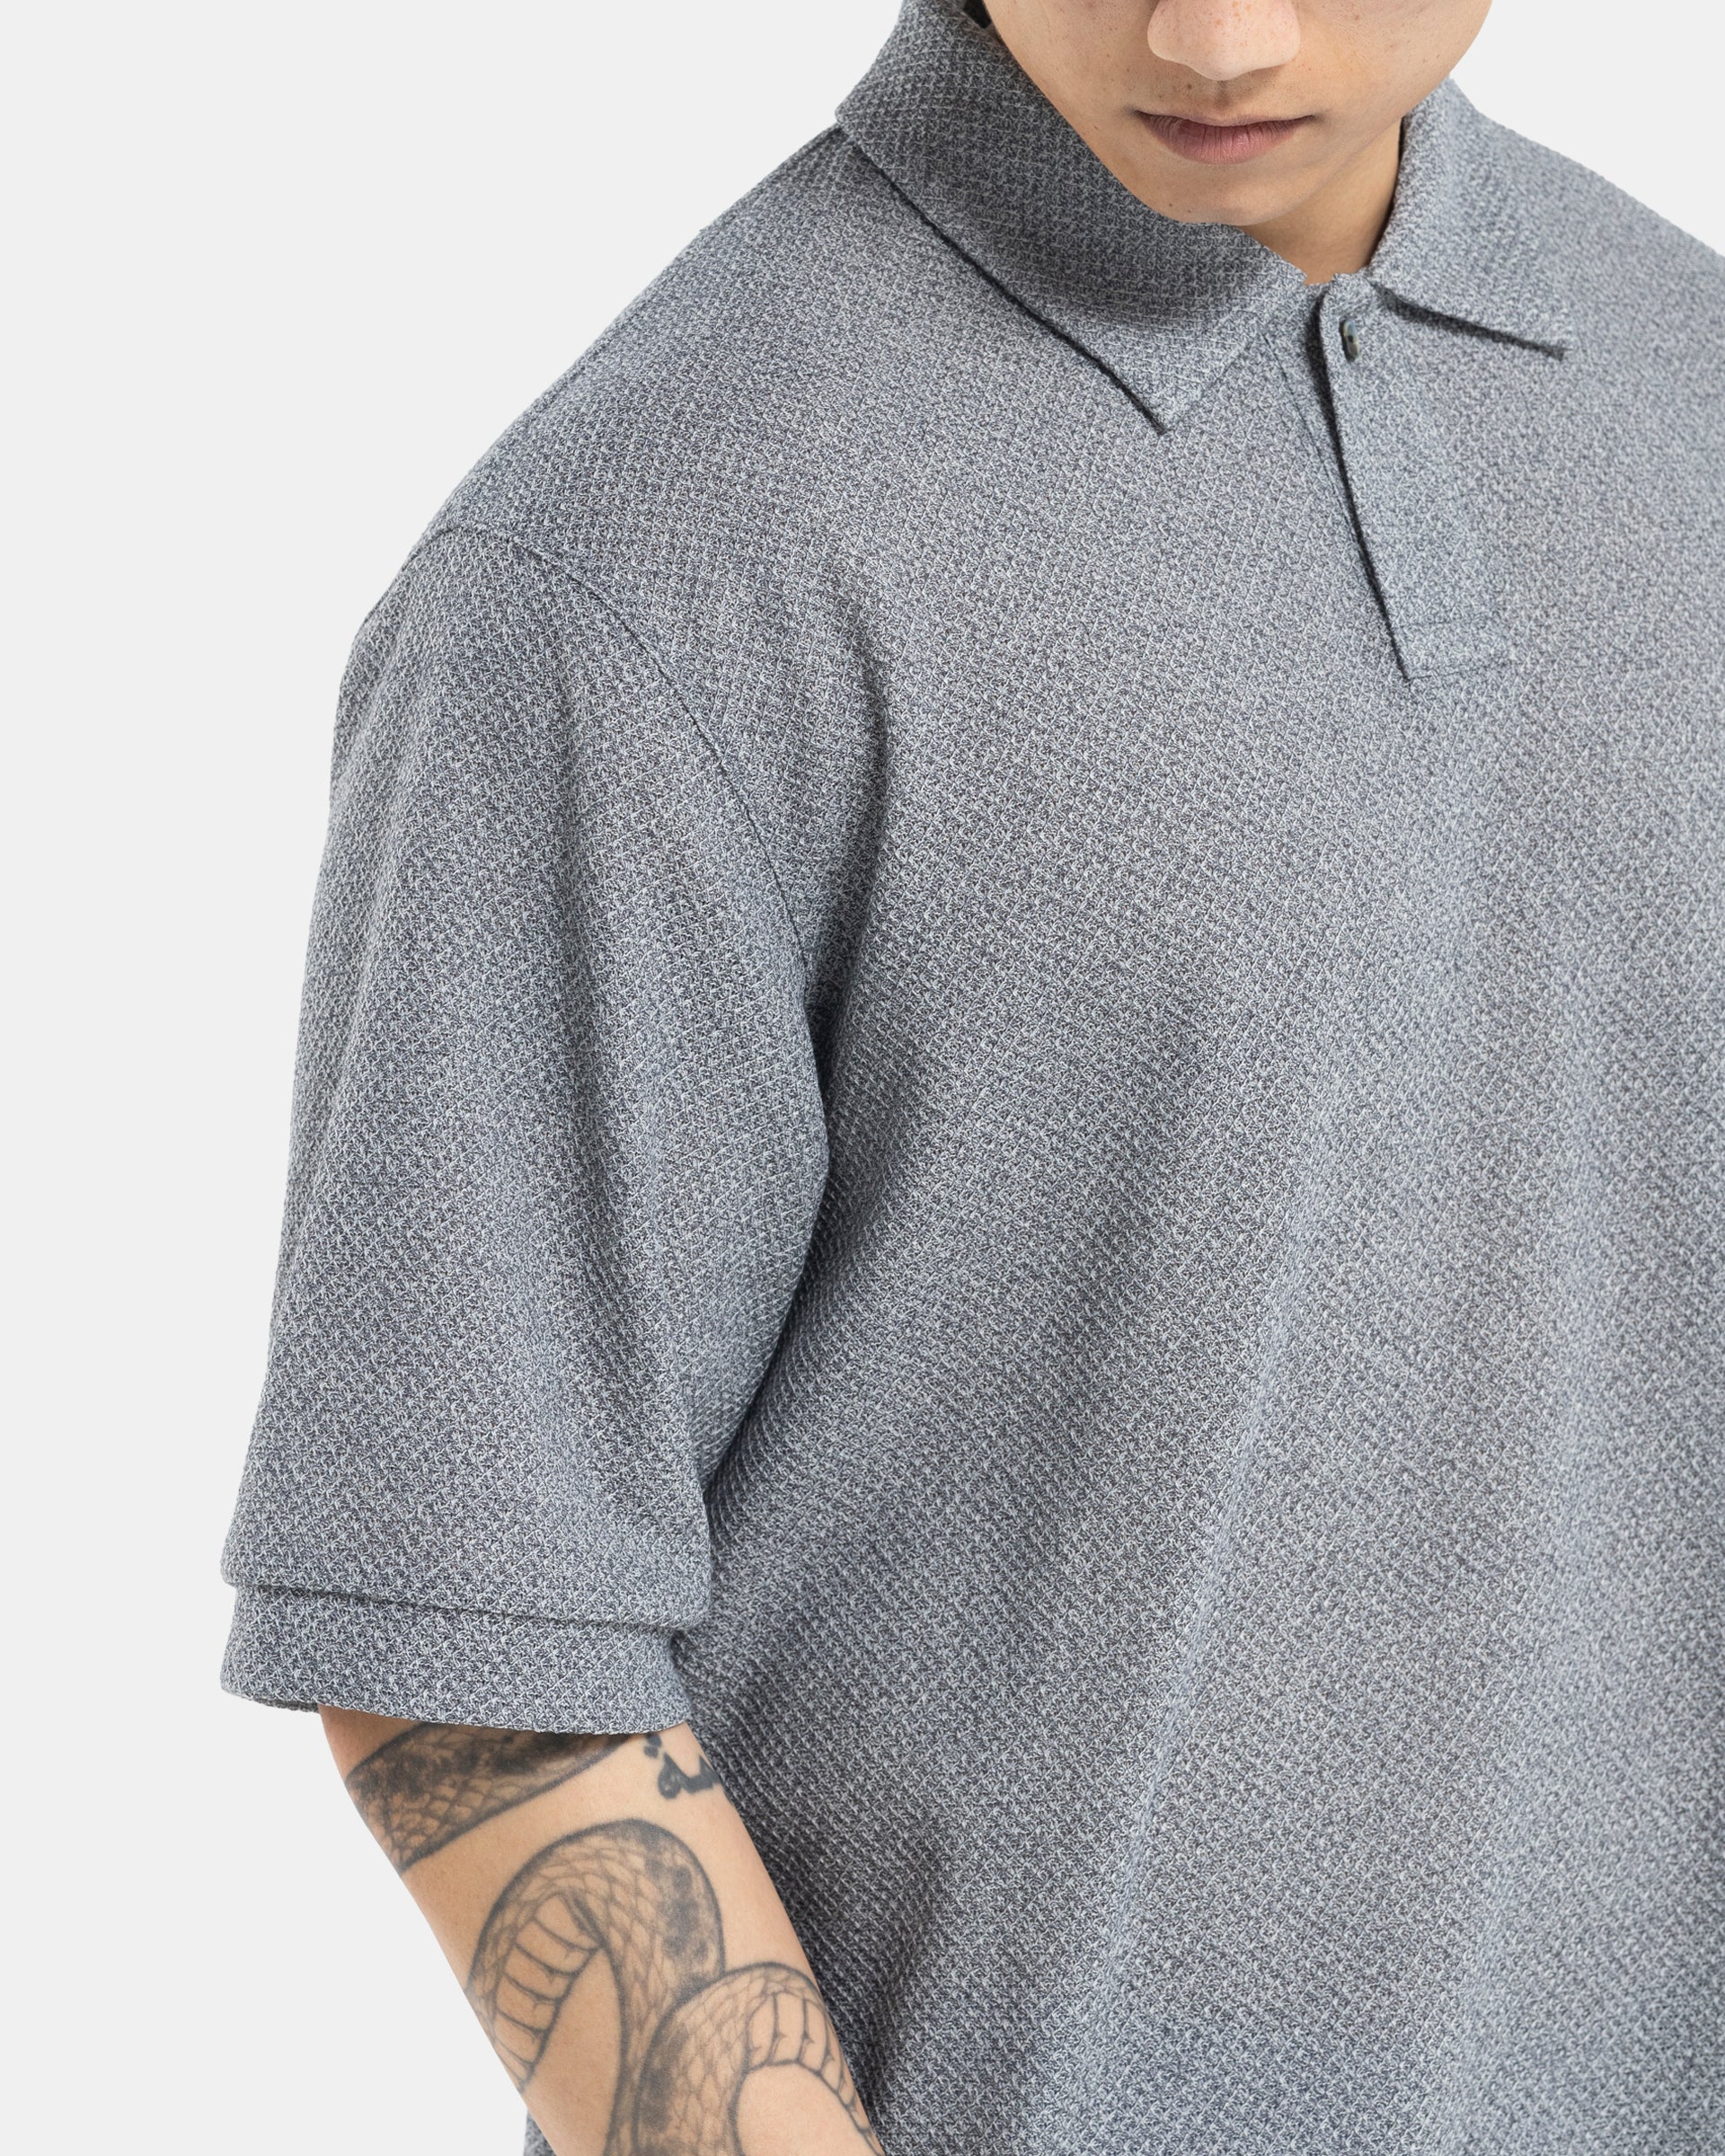 Male model wearing grey Still By Hand polo shirt on white background